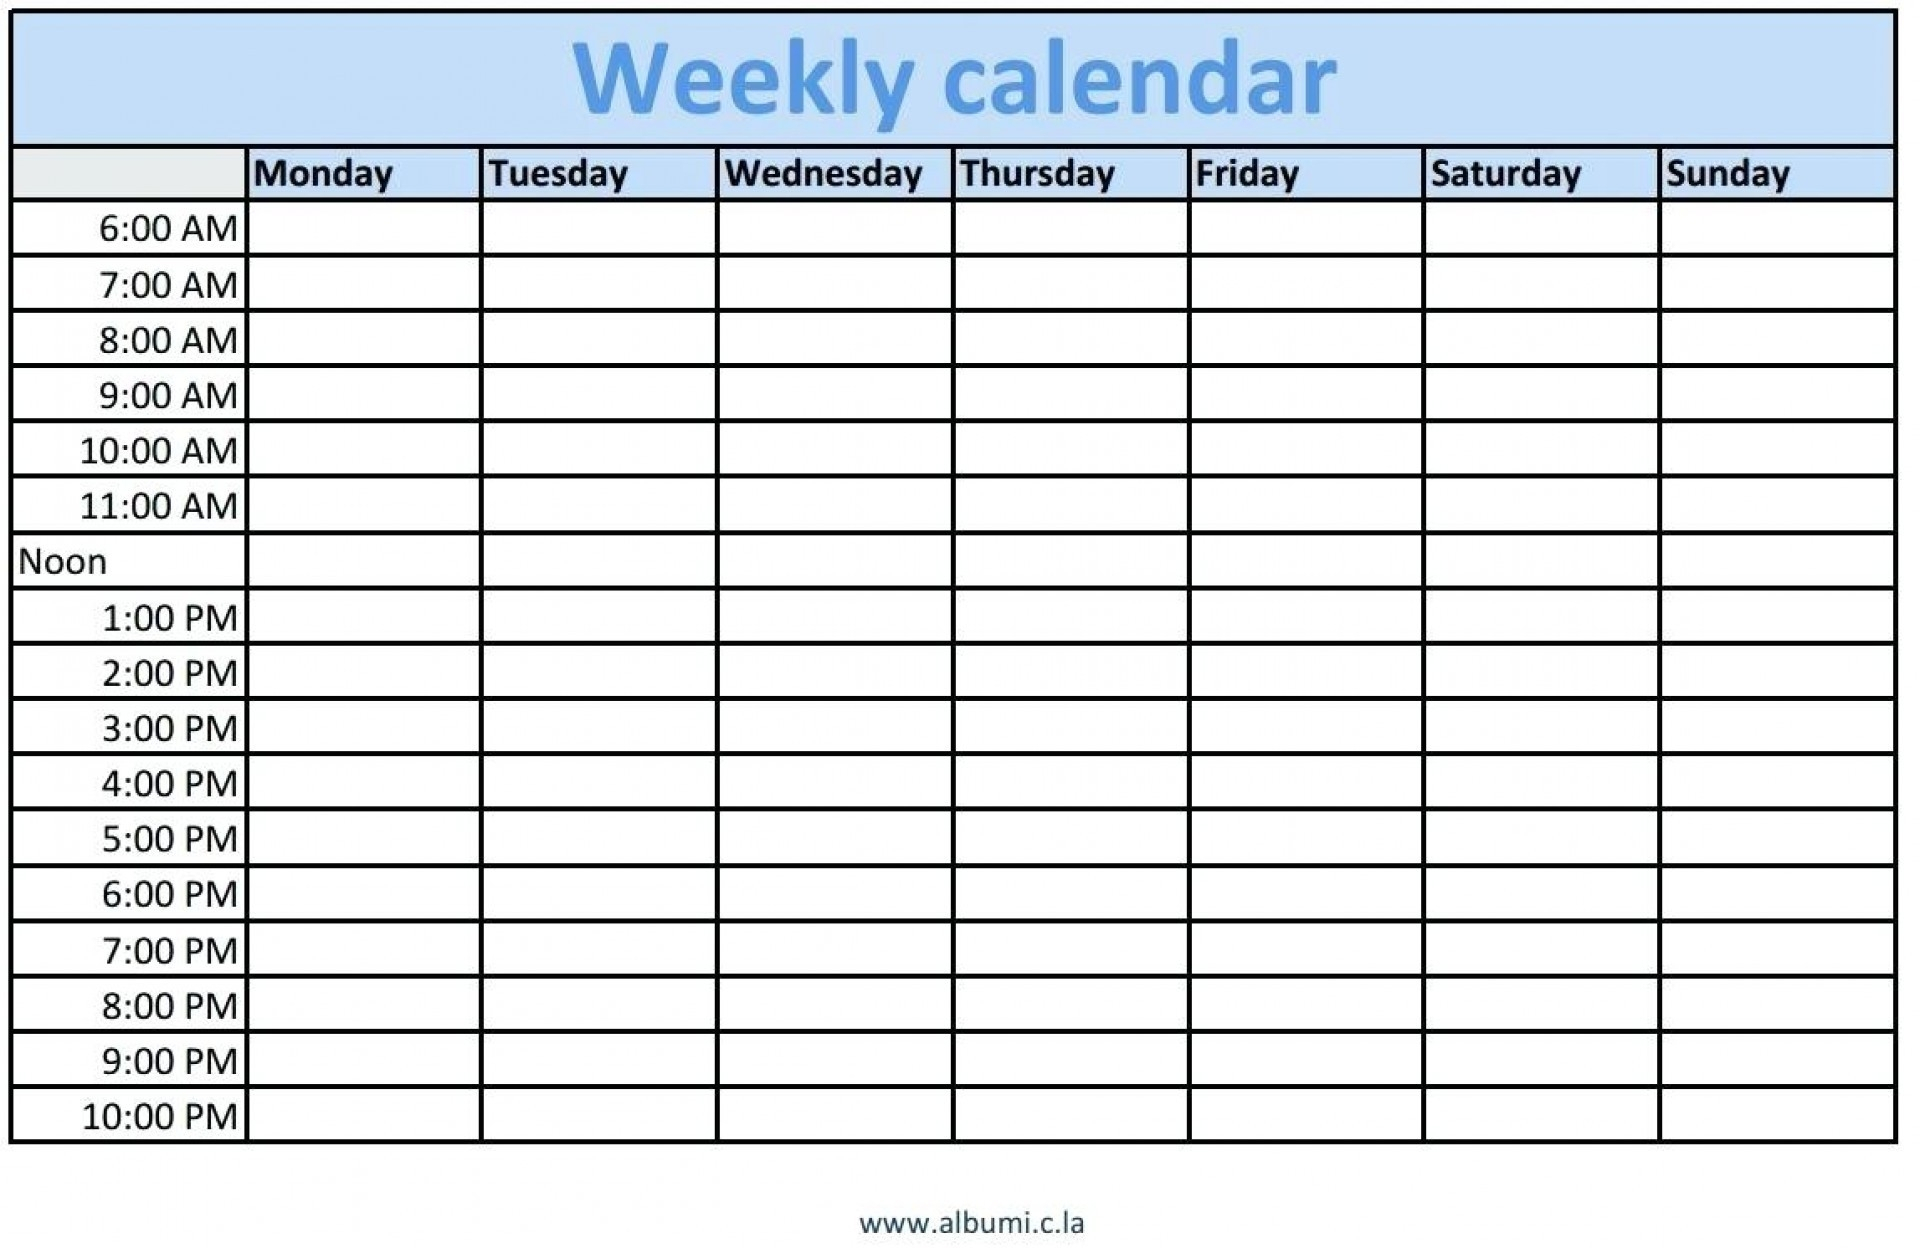 Blank Schedule Template With Time Slots | Example Calendar regarding Daily Calendar Template With Time Slots